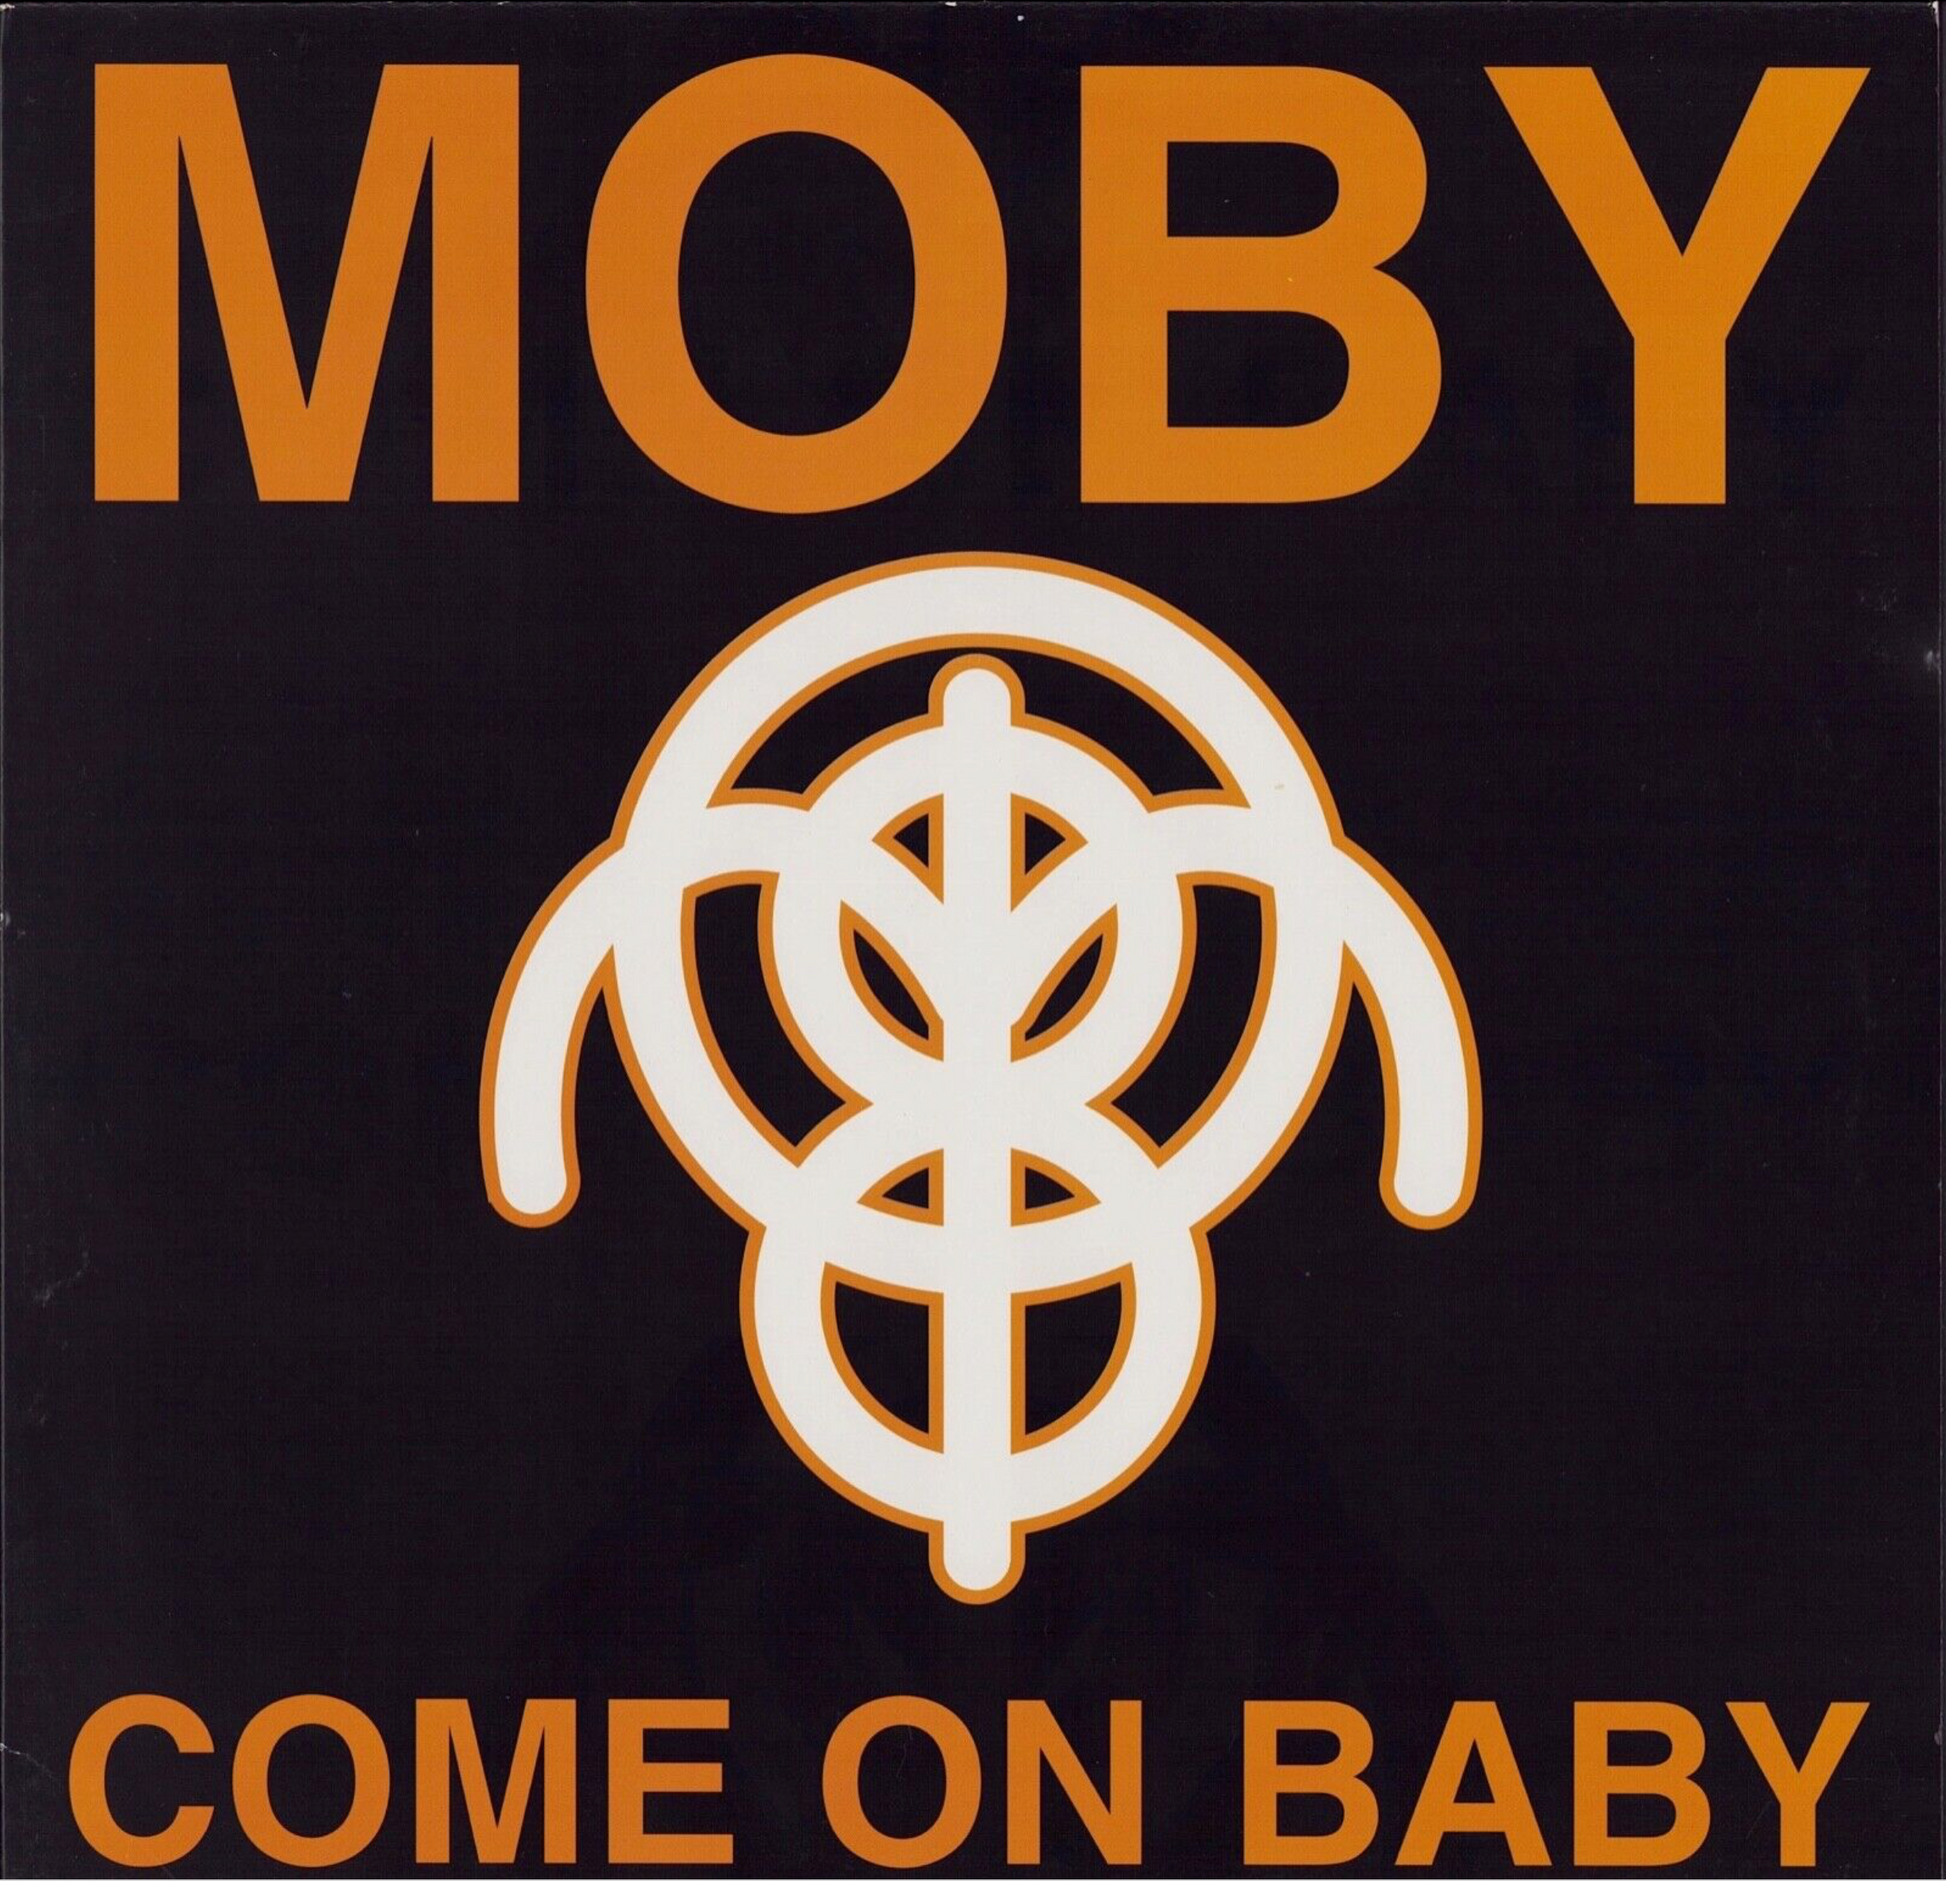 Moby ‎- Come On Baby Vinyl 12" - Mute ‎- UK 1996